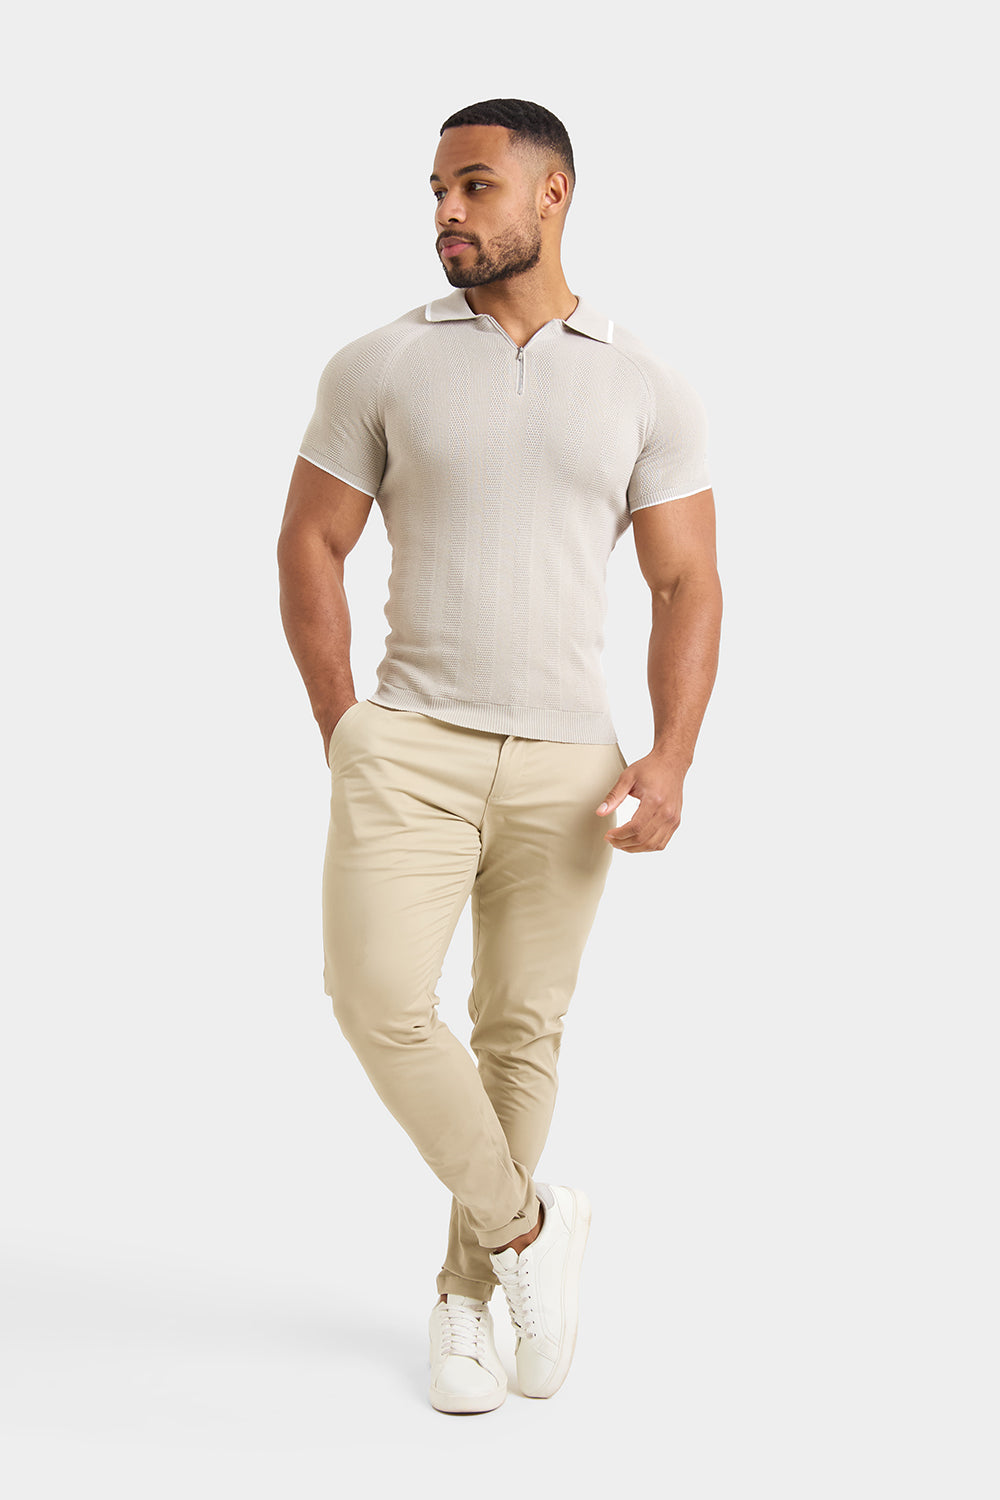 Textured Rib Zip Neck Knit Polo in Stone - TAILORED ATHLETE - ROW